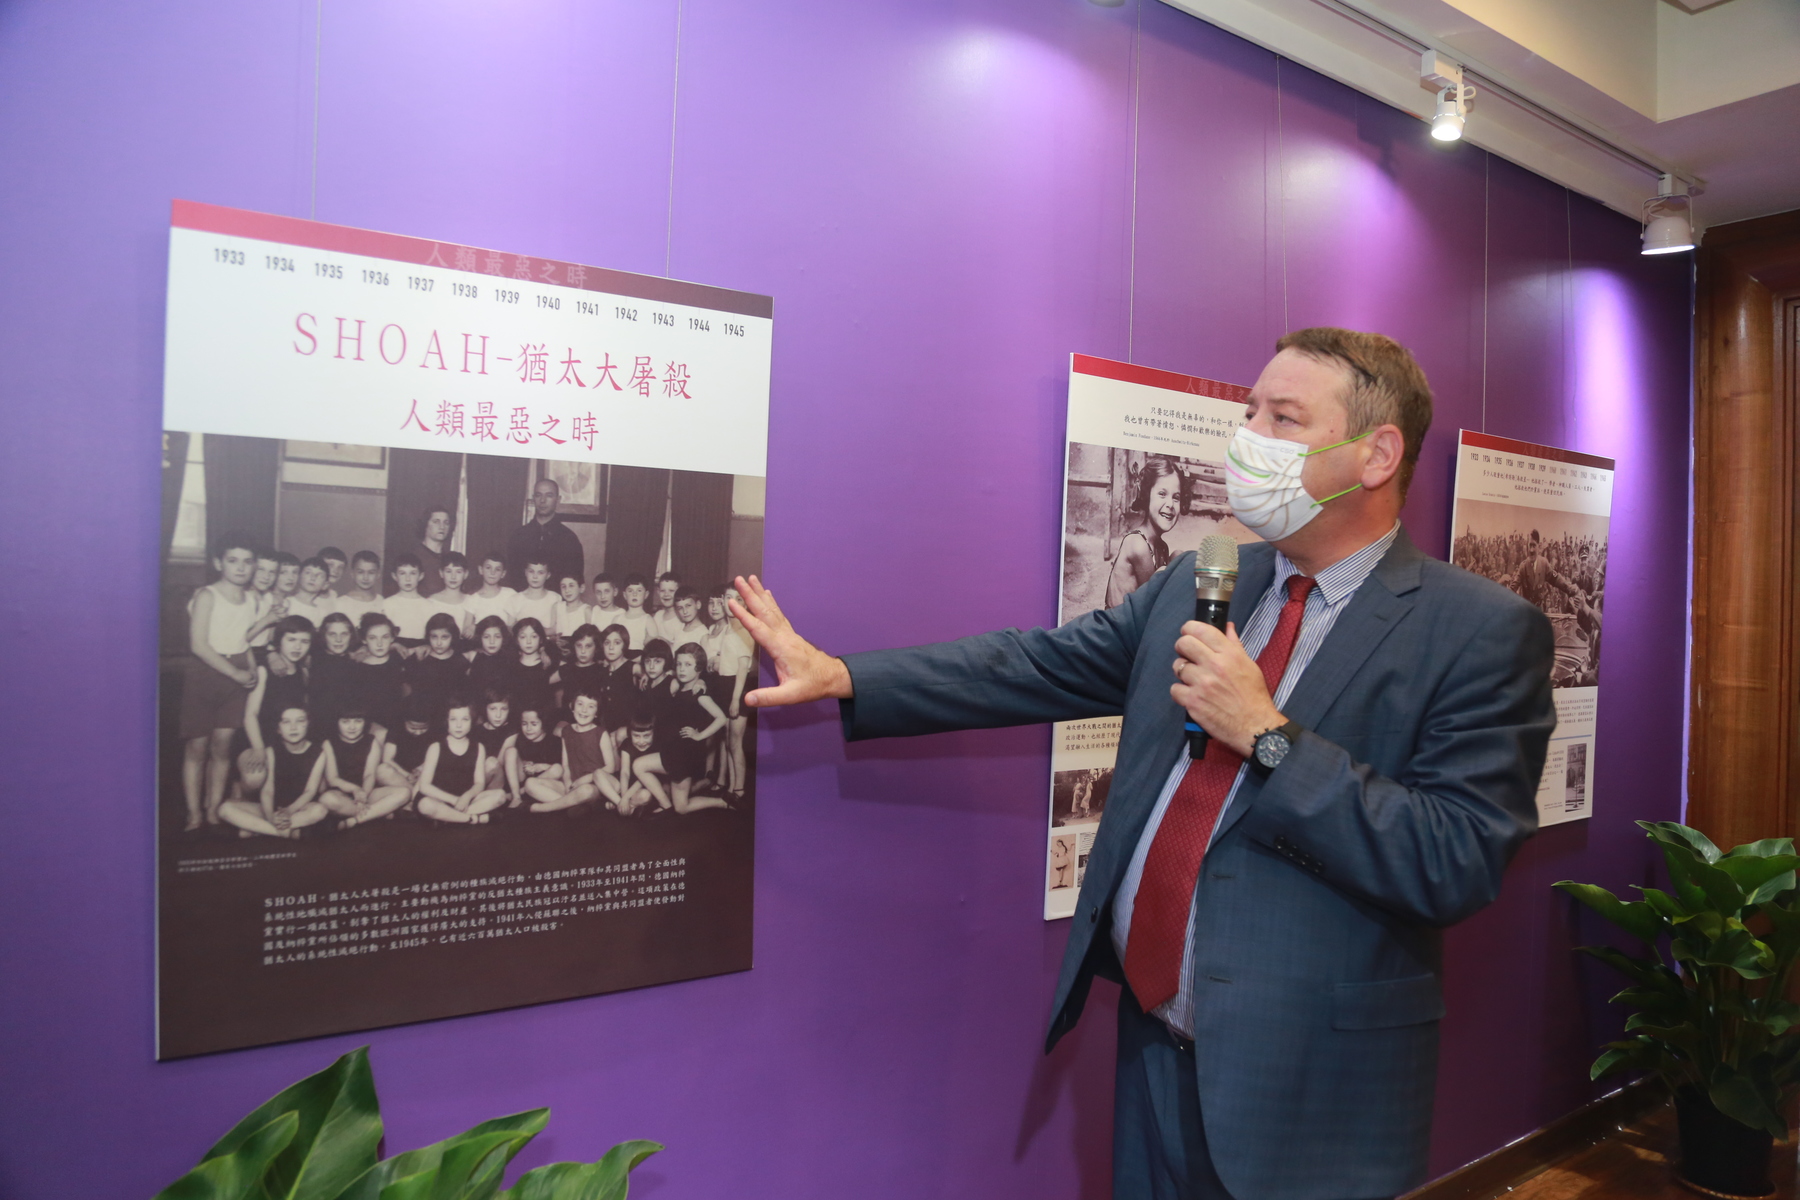 Representative of Israel Economic and Cultural Office in Taipei Omer Caspi said that about 192,000 Holocaust survivors live in Israel today; they are getting older, and soon, very few of them will be able to tell their stories in person. It is therefore of outmost importance to preserve these accounts for generations to come.